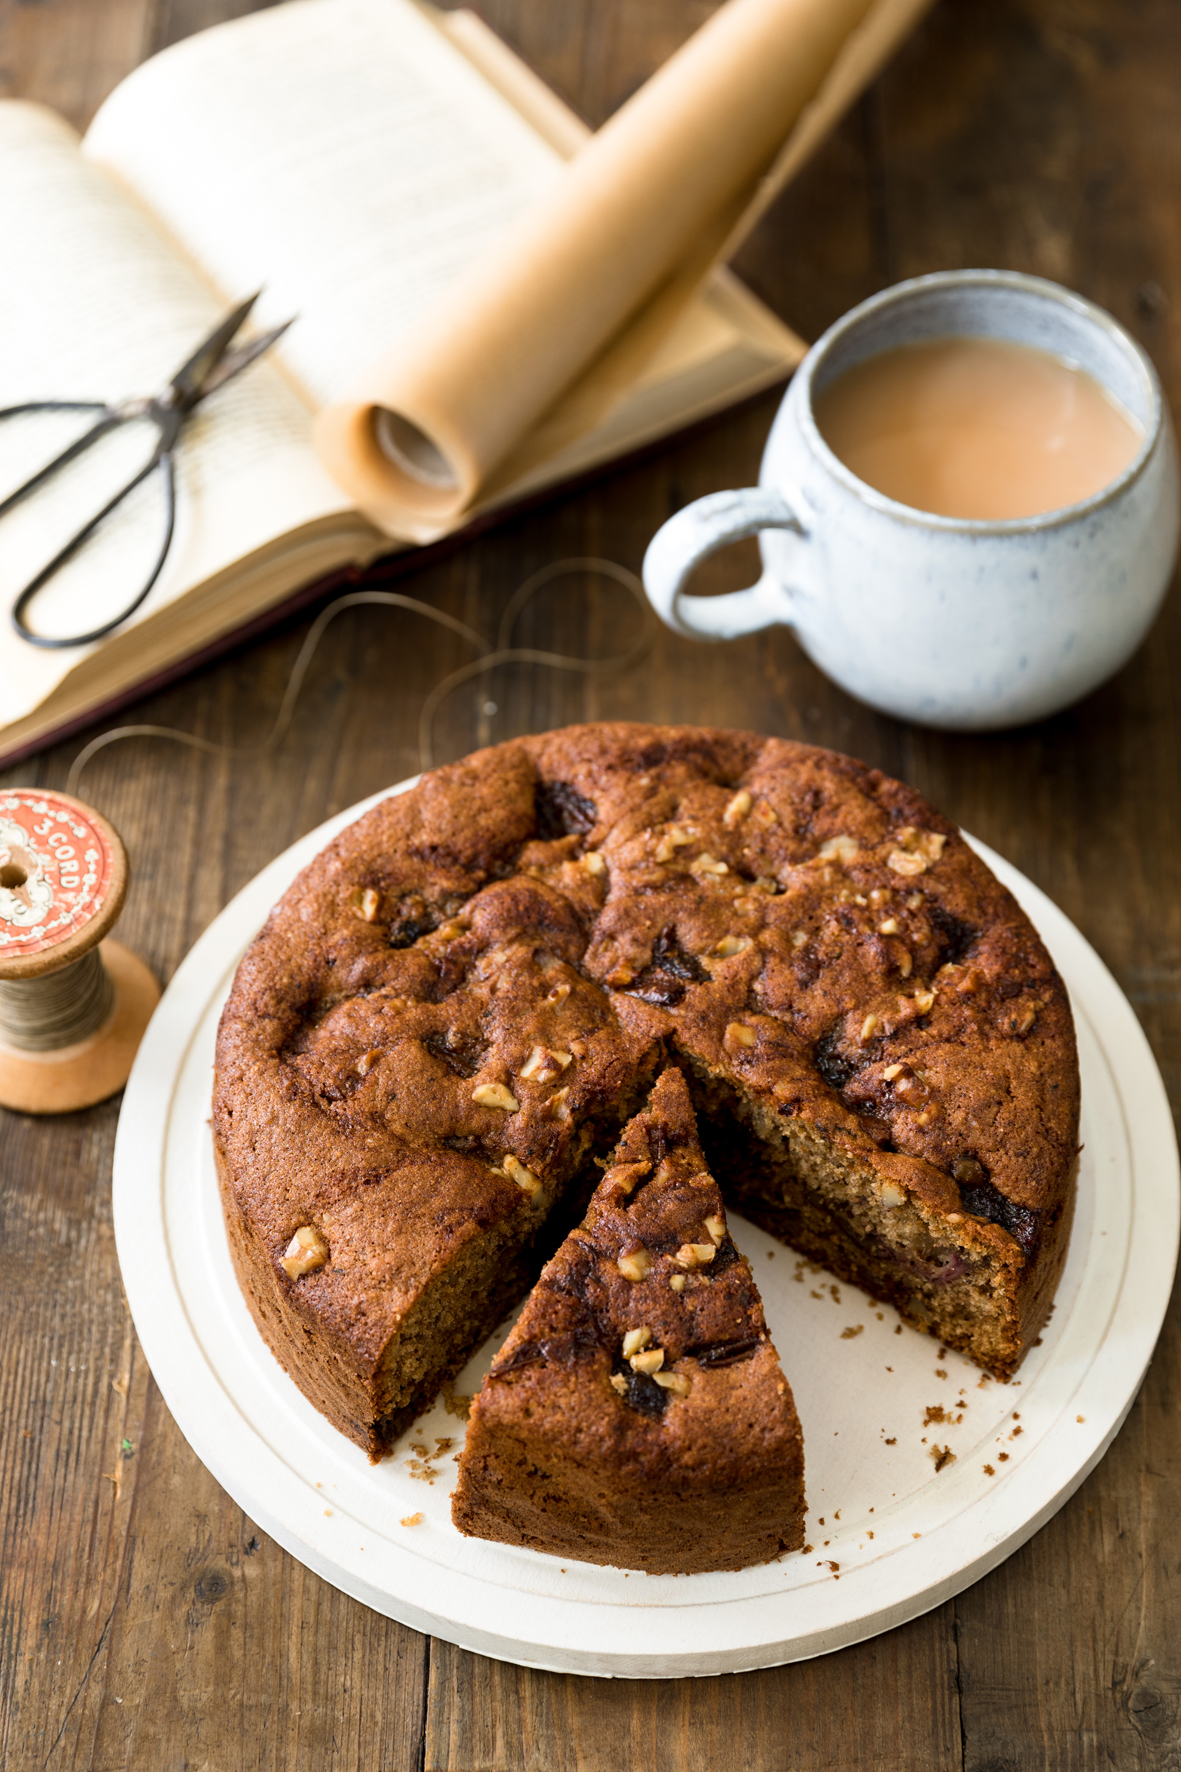 Date and Walnut Cake - My Gorgeous Recipes